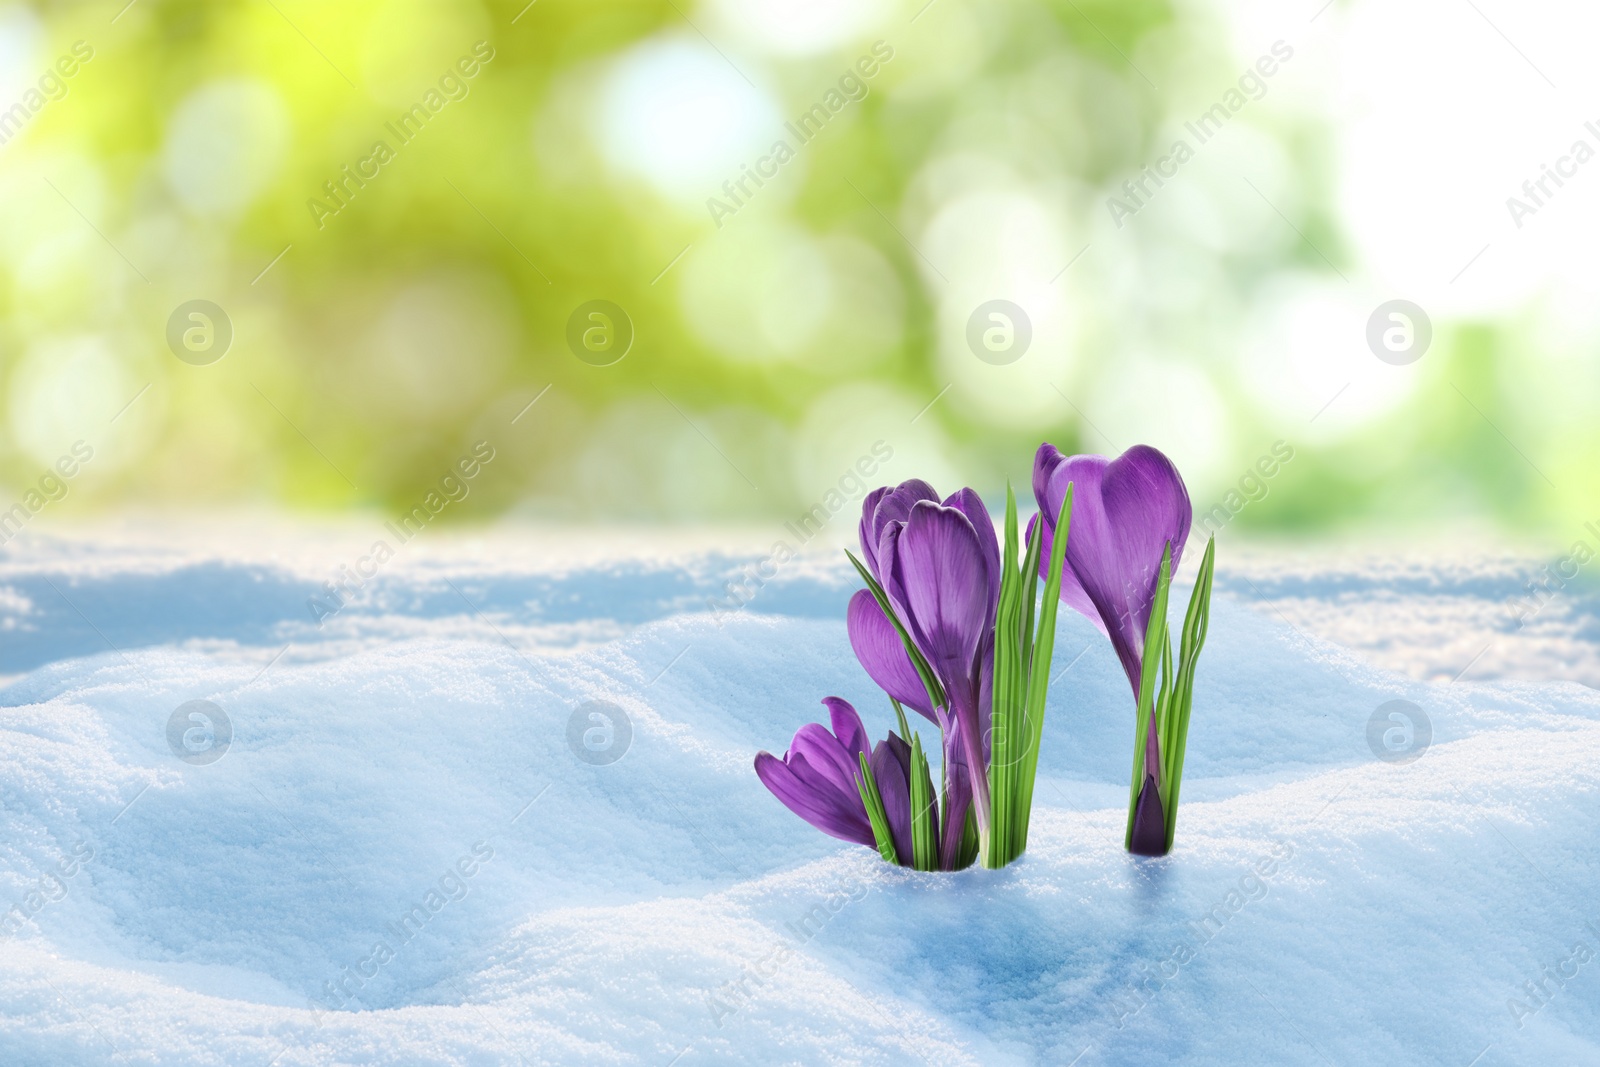 Image of Beautiful crocuses growing through snow outdoors on sunny day. First spring flowers